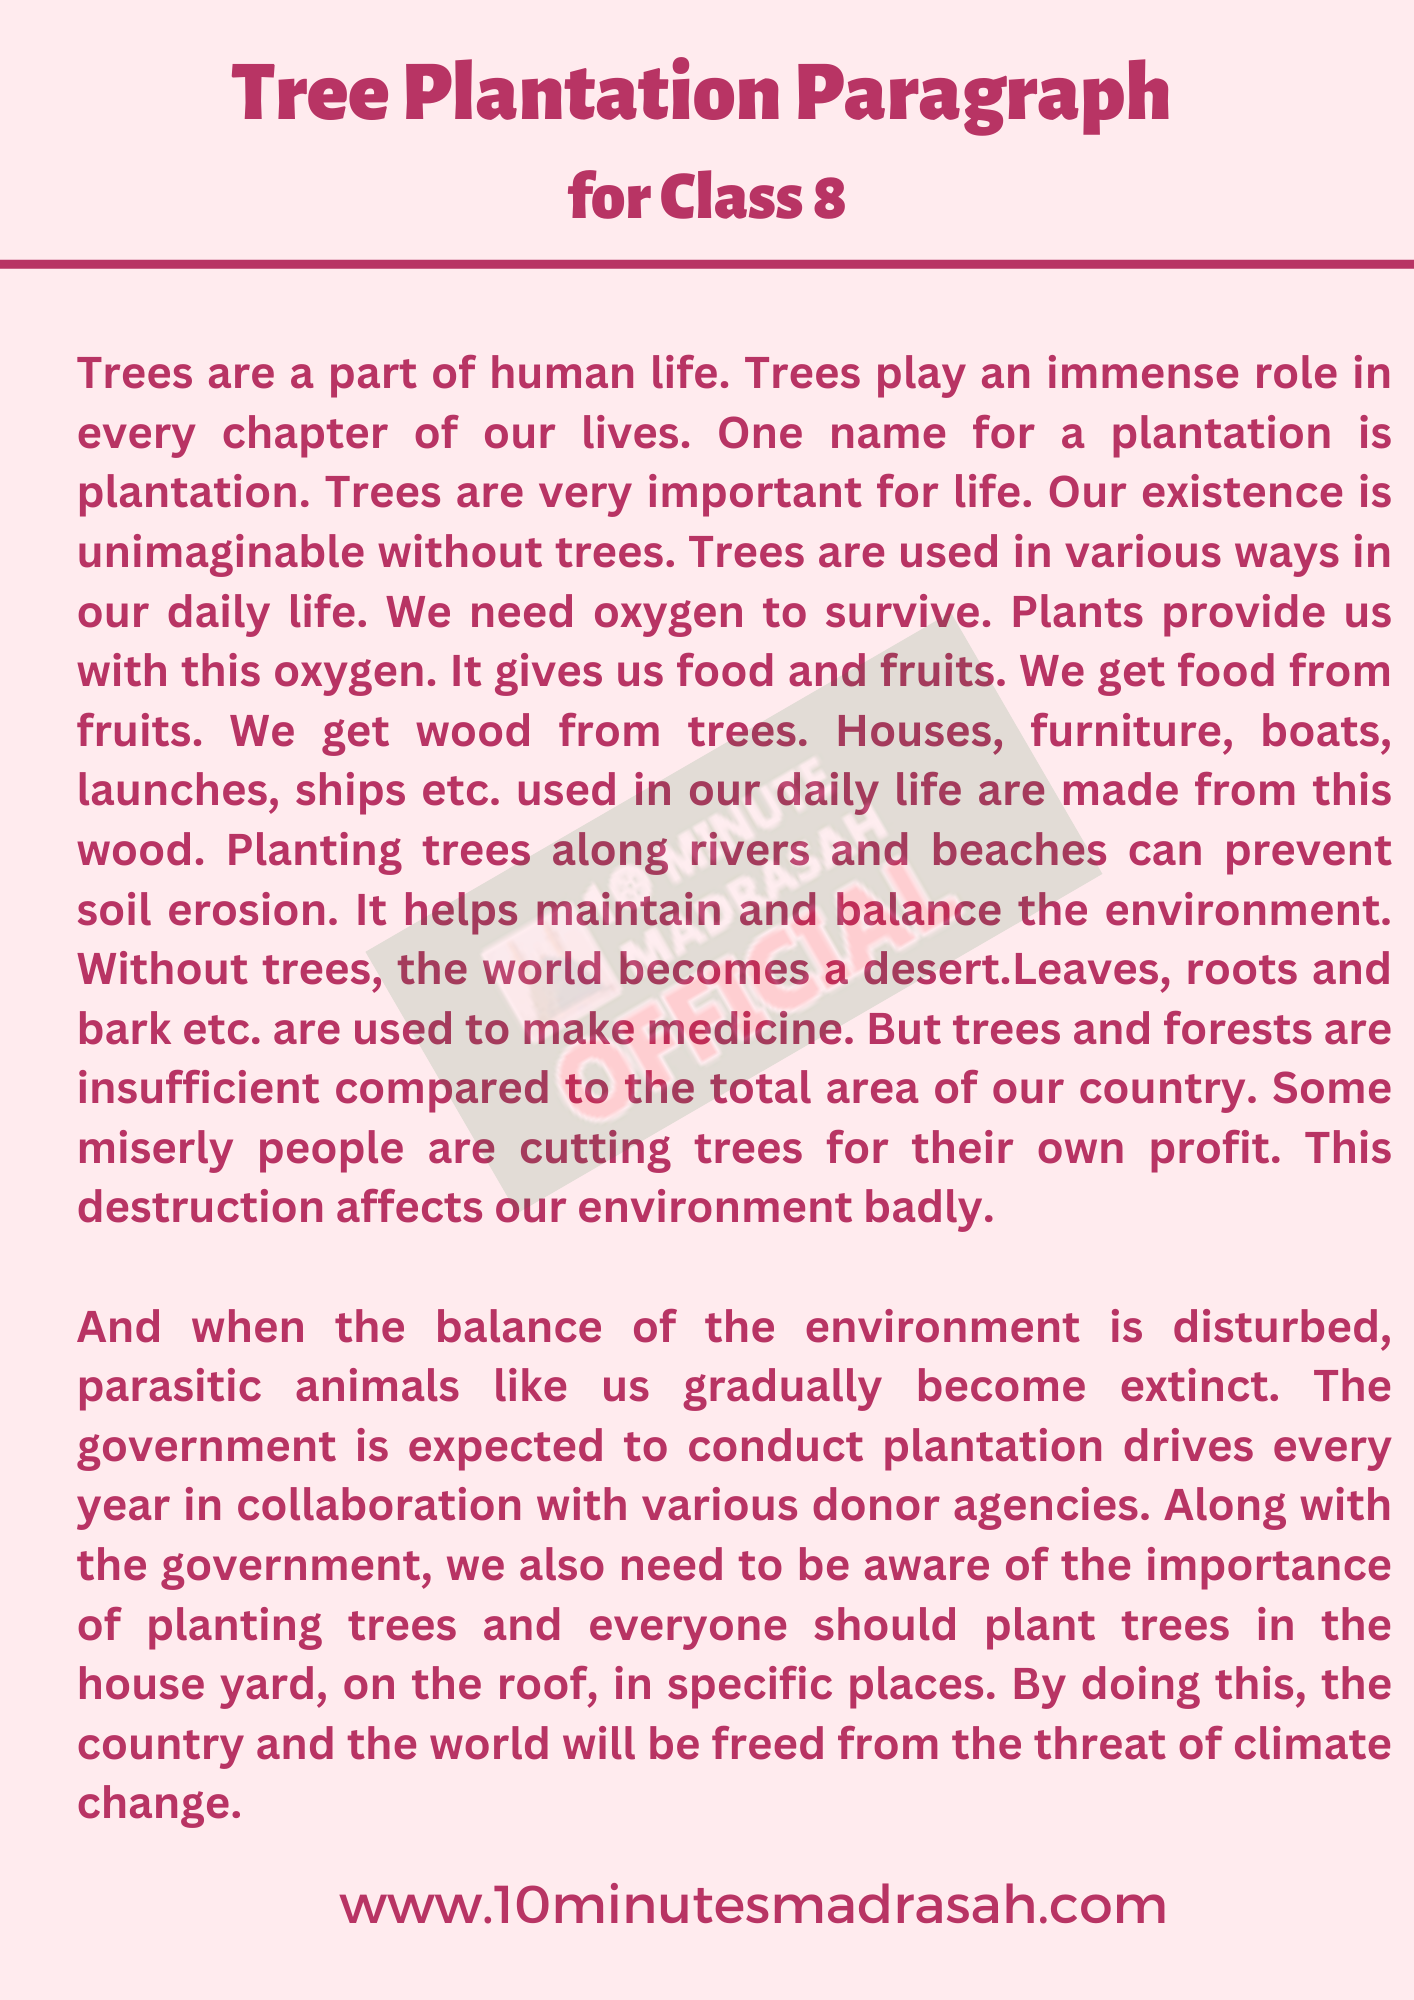 Tree Plantation Paragraph for Class 8 Students